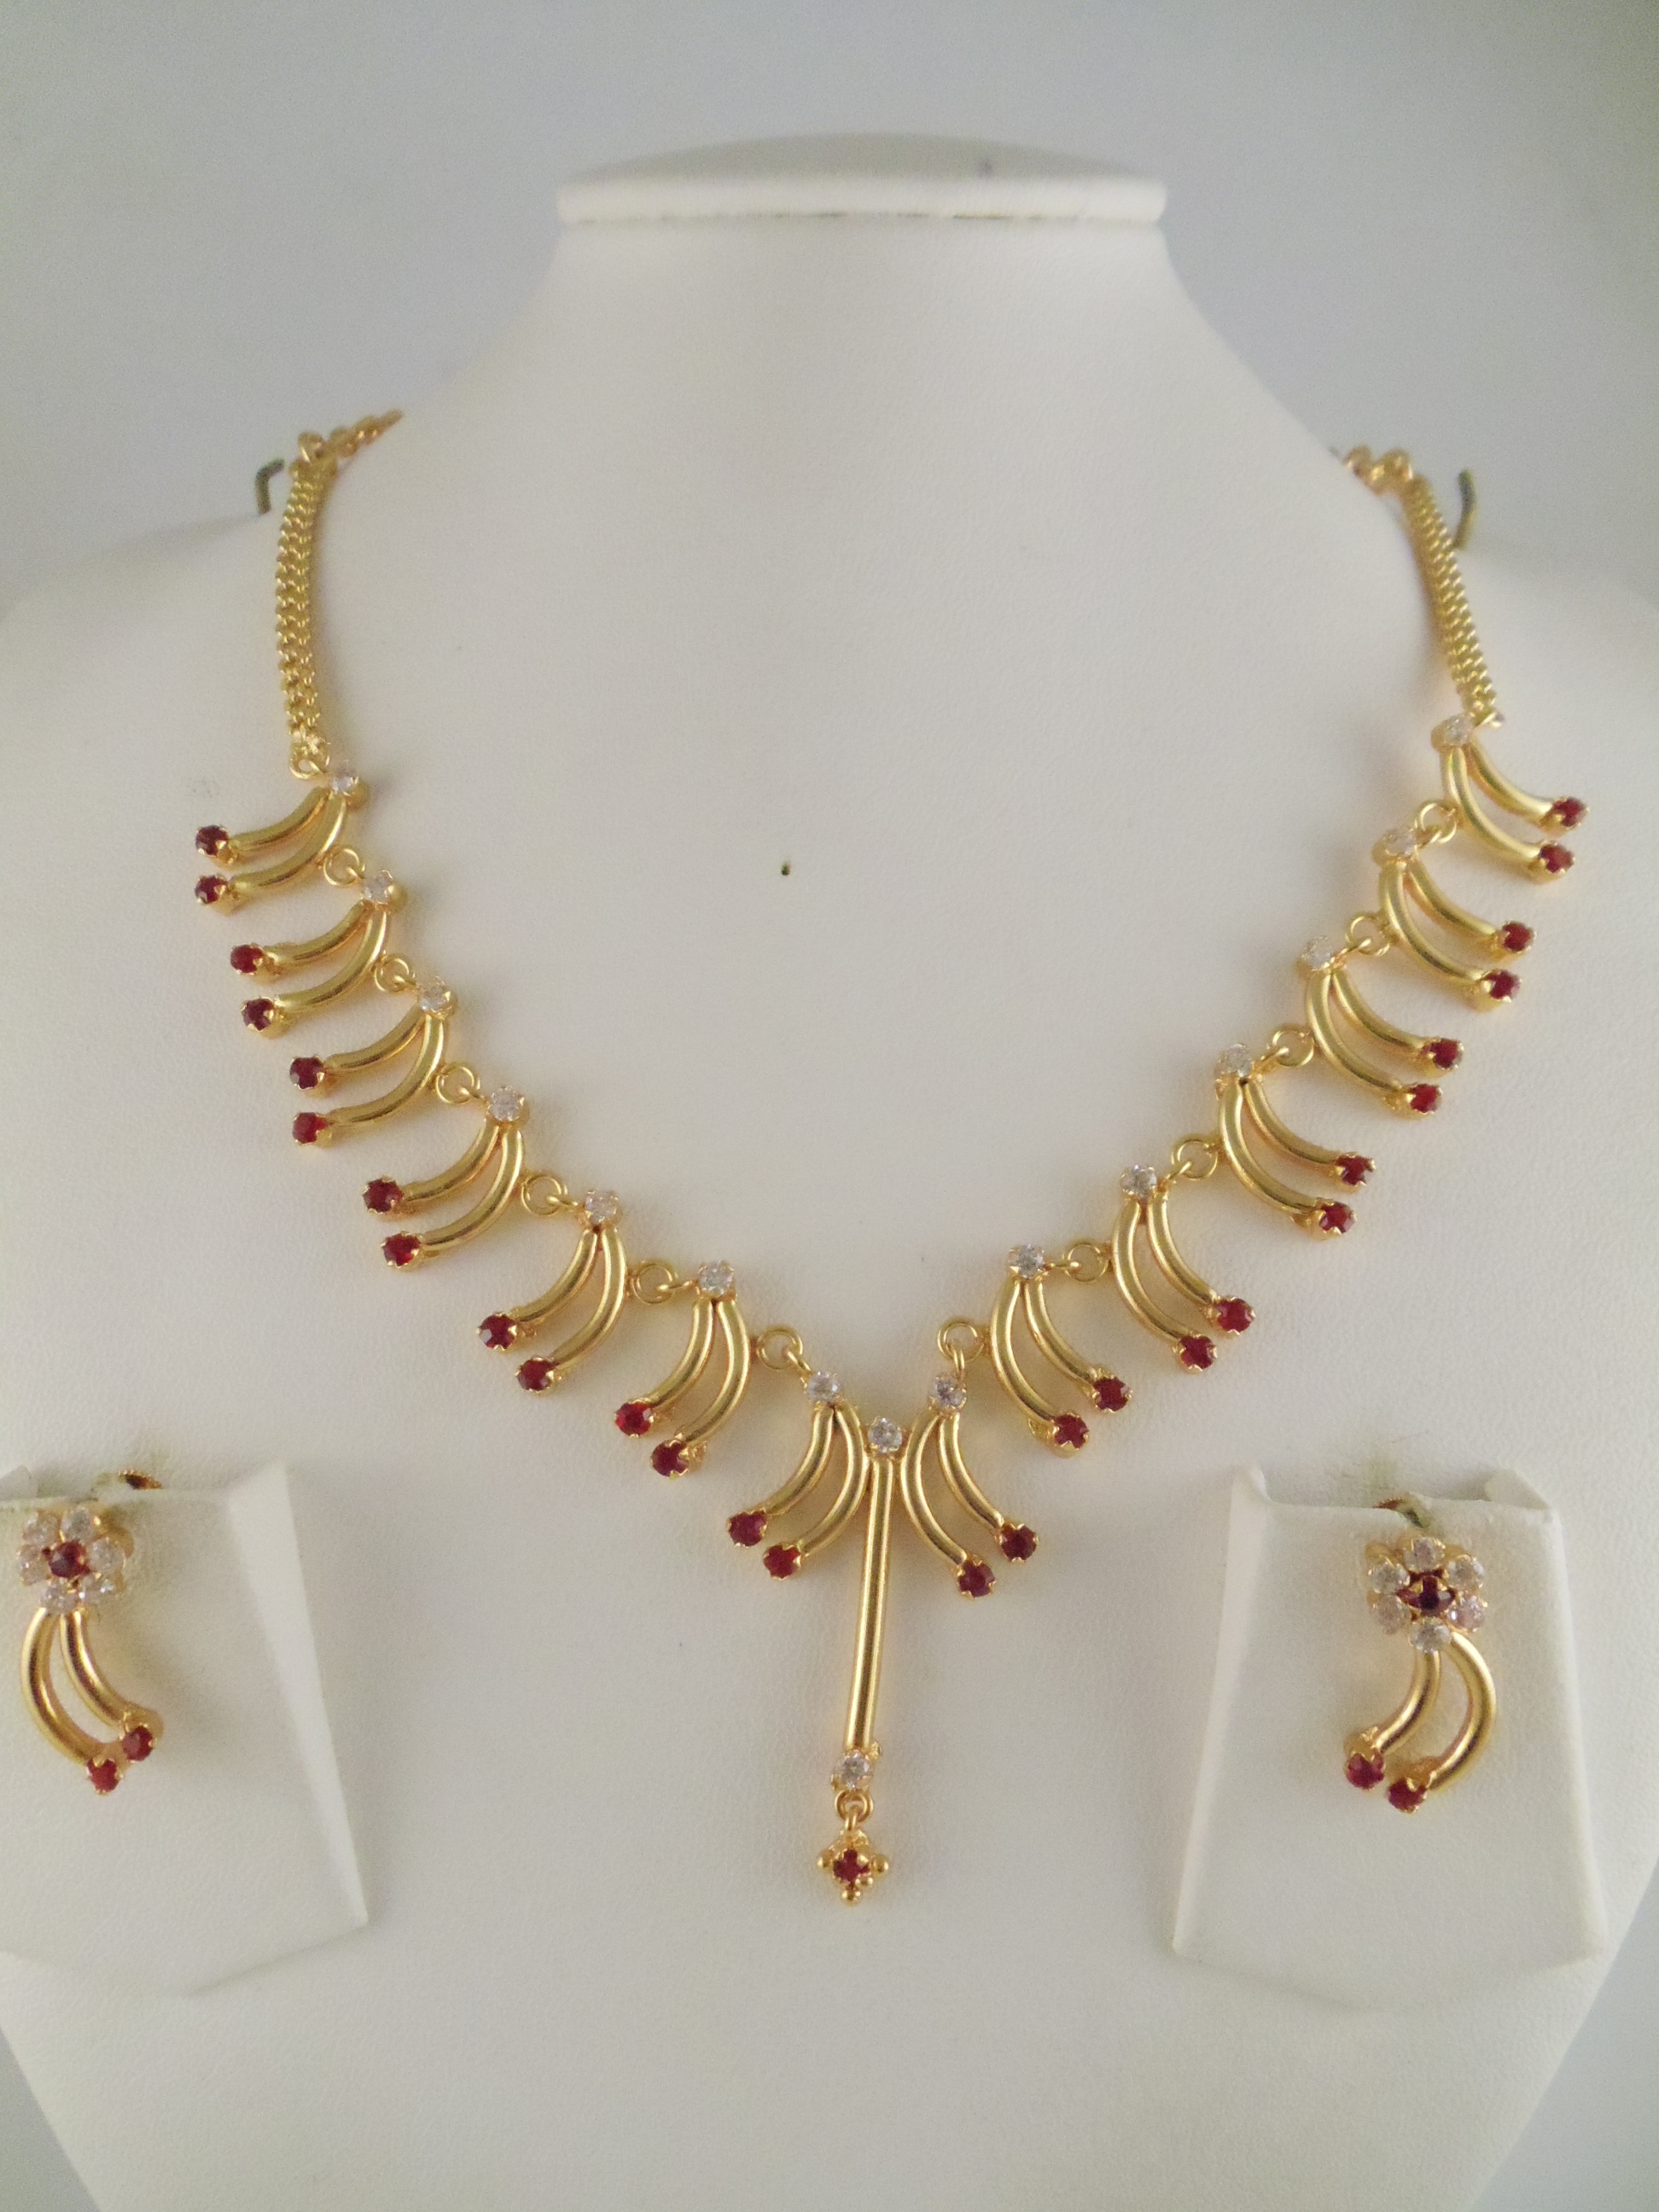 1gm Gold Jewelry Necklace Sets